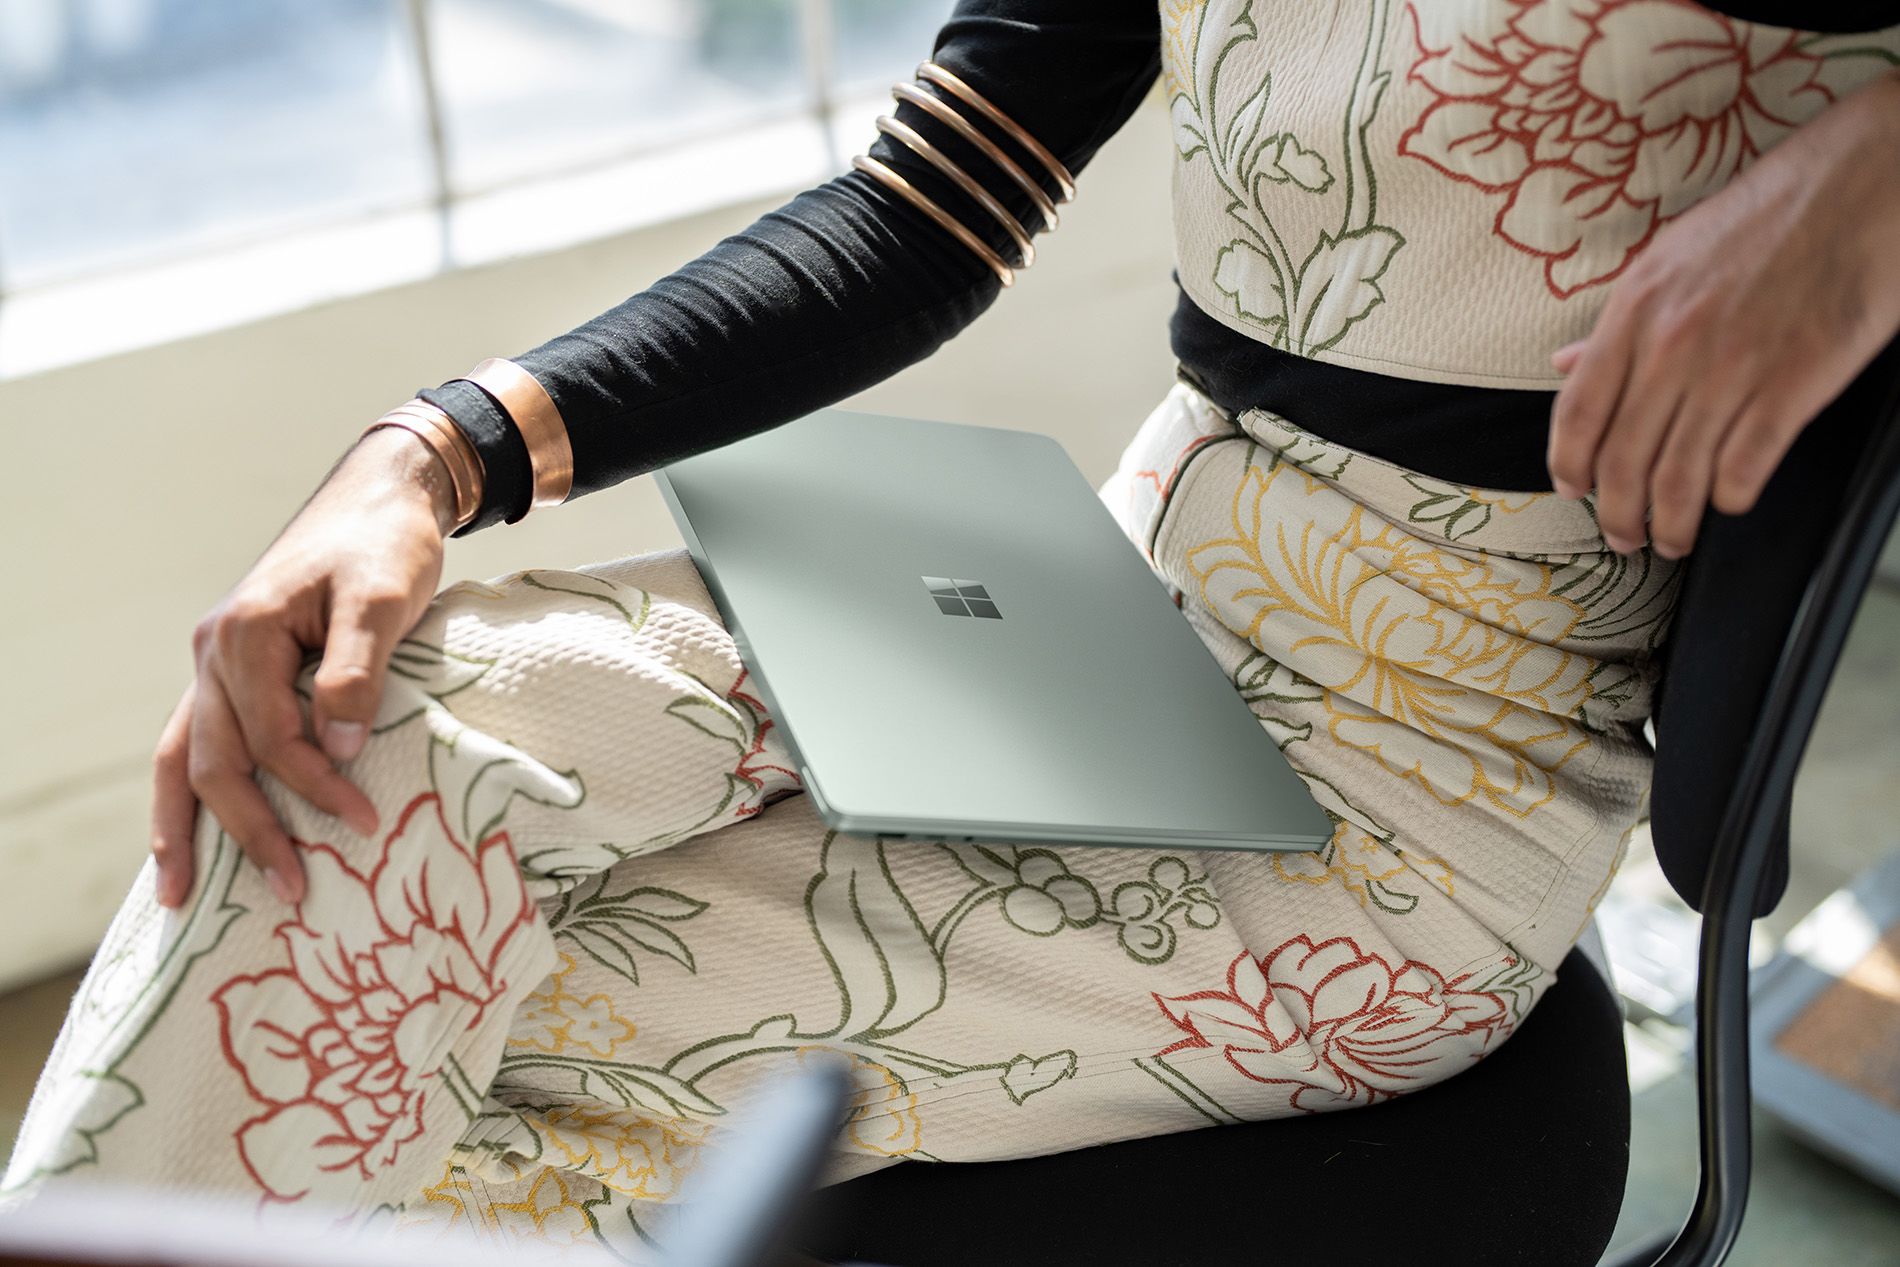 Microsoft unveils pink Surface Laptop 2 exclusively for China